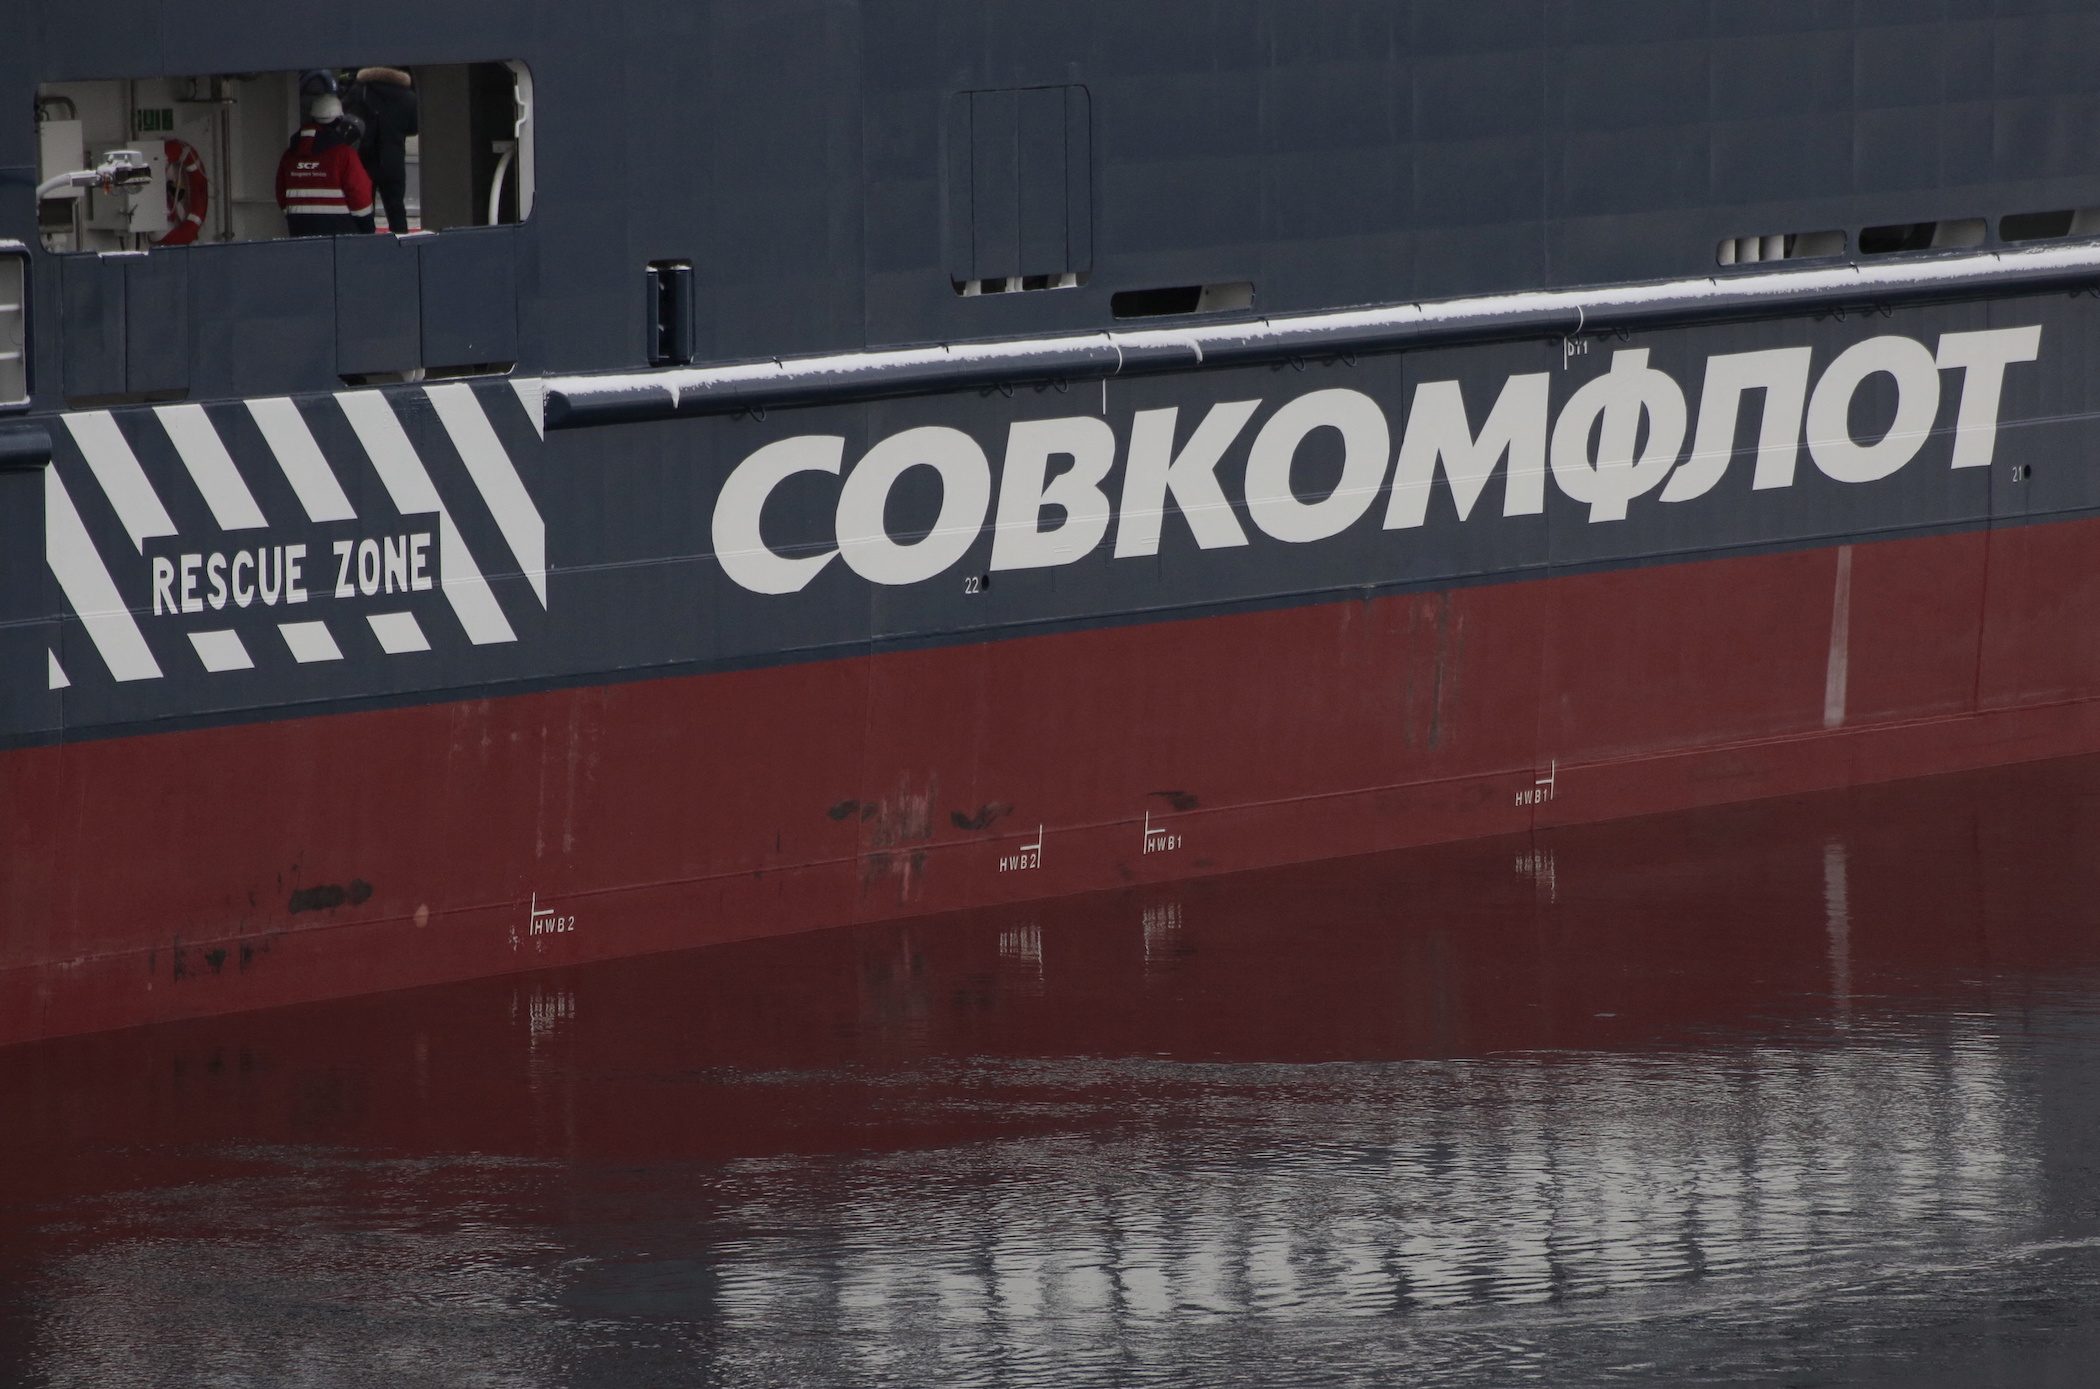 Russia-owned SCF oil tankers rerouting from Canada, returning to Russia